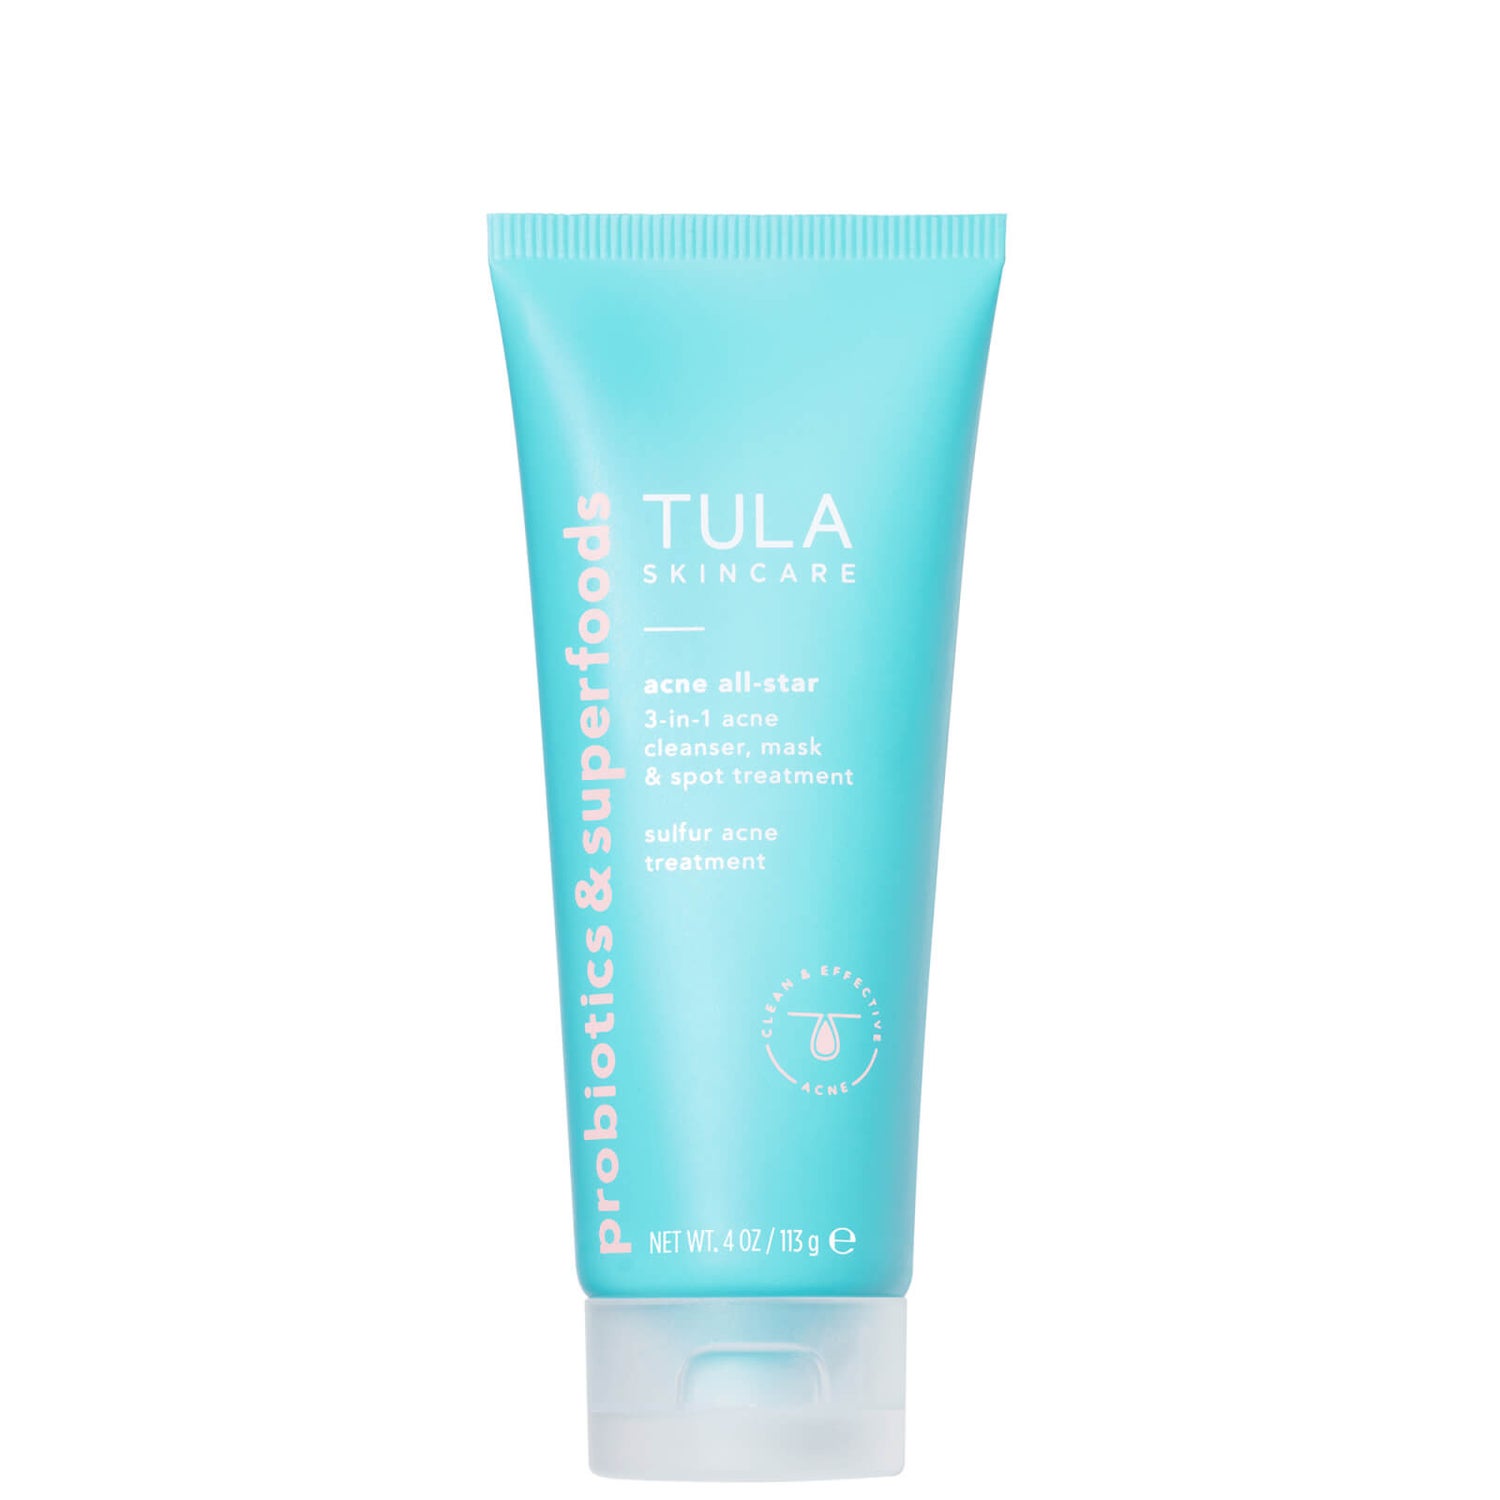 TULA Skincare Acne All-Star 3-in-1 Acne Cleanser, Mask and Spot Treatment 20ml